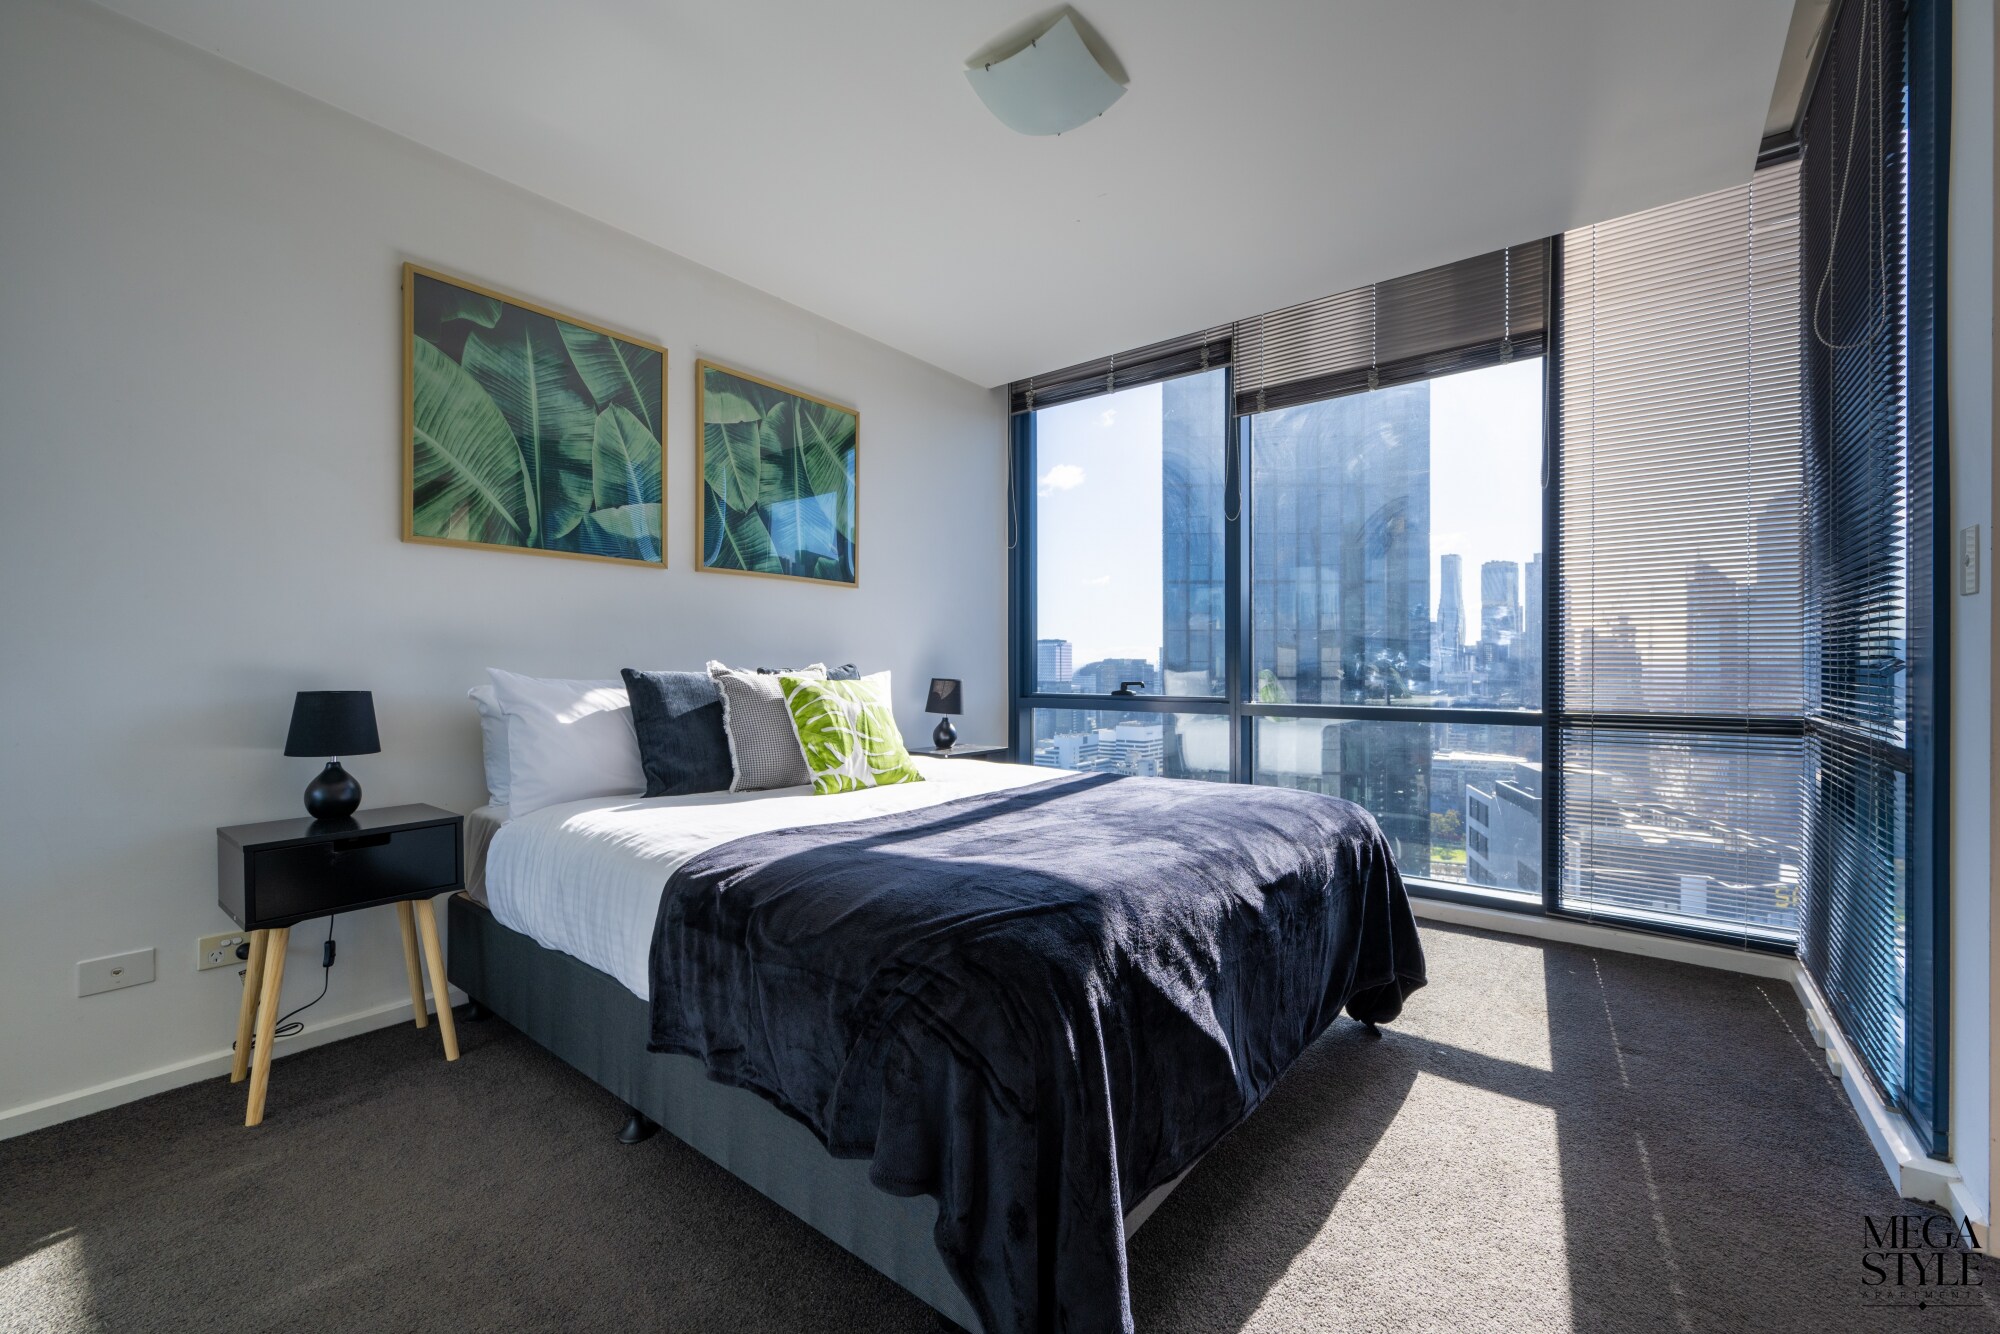 Master bedroom also features city views from the floor to ceiling windows